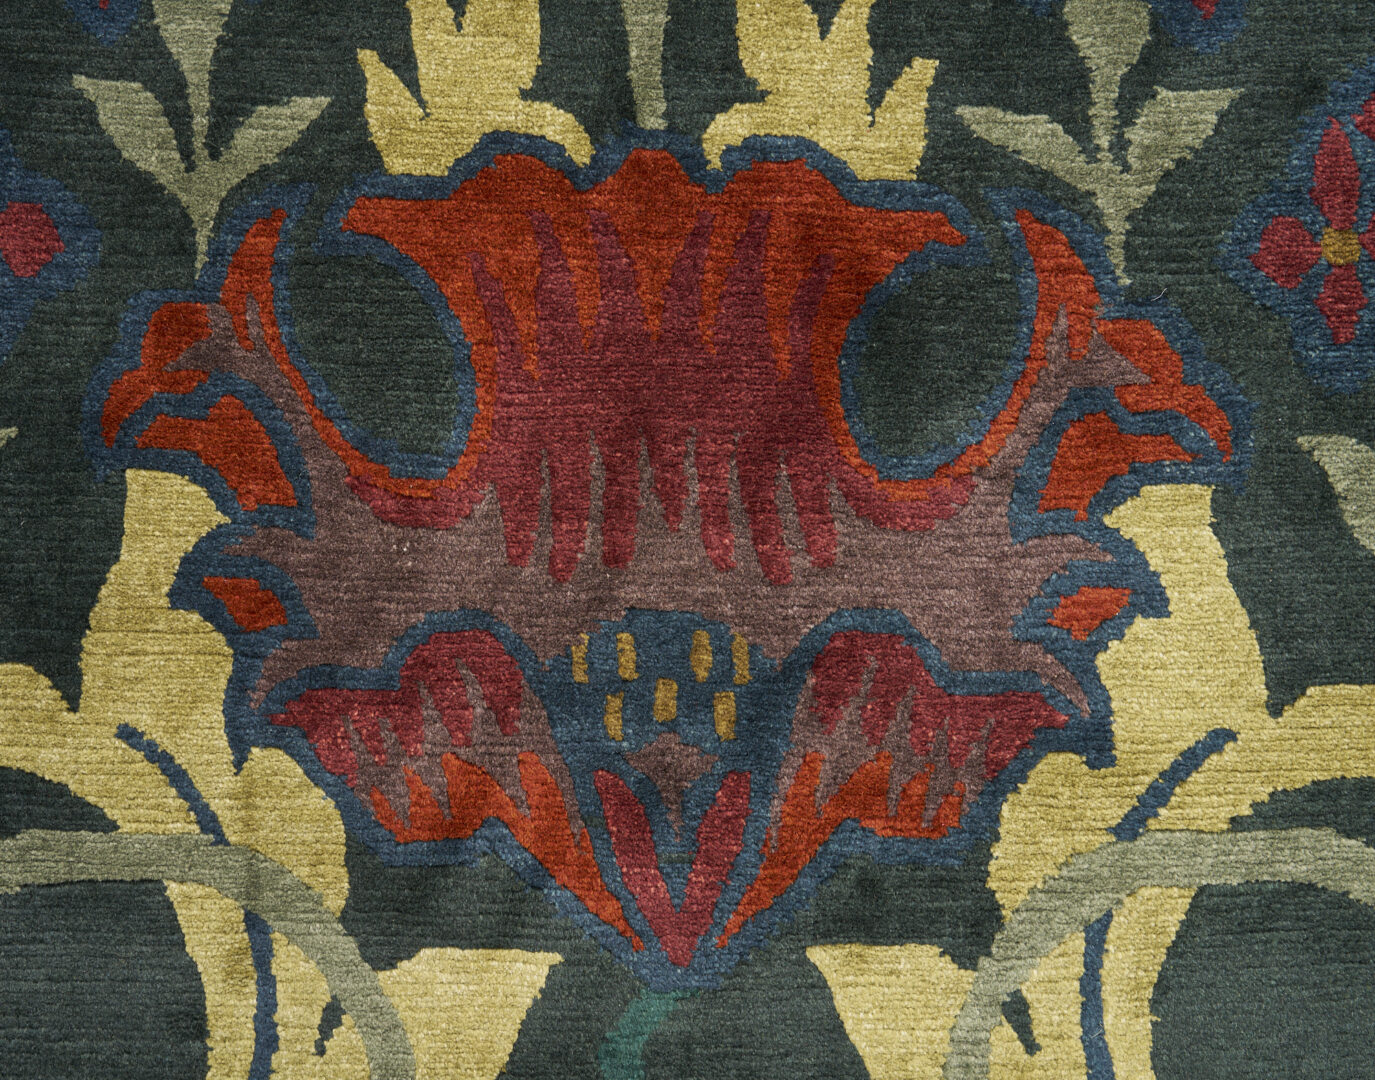 Lot 429: William Morris style "English Garden" rug by Stickley; Approx. 10' x 8'